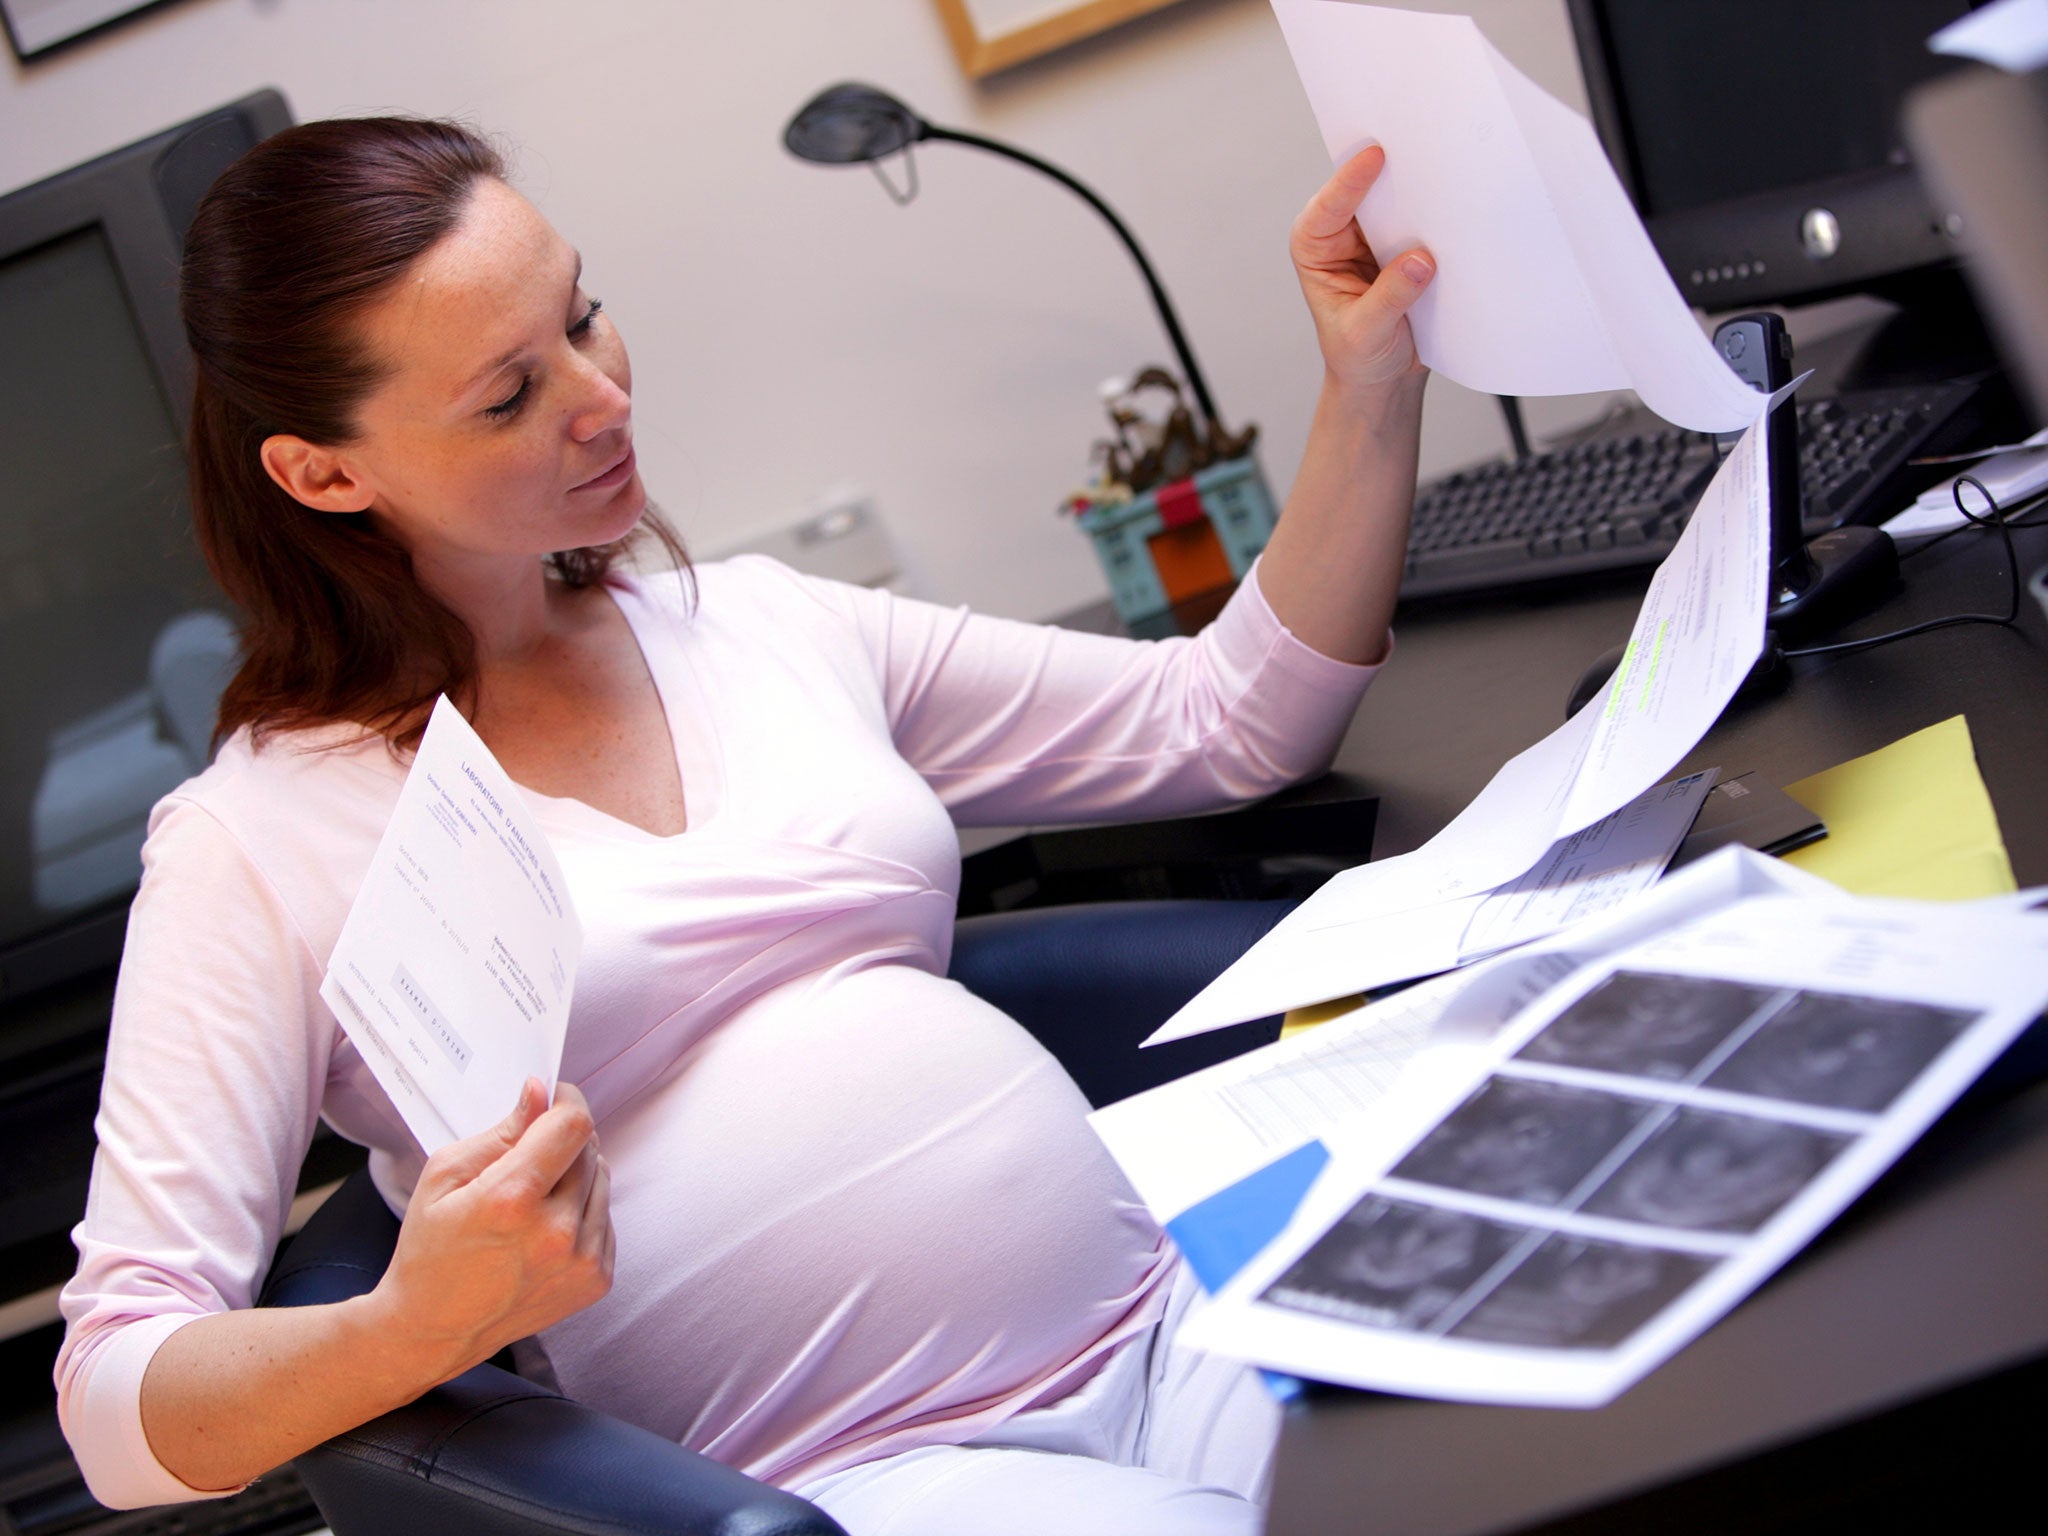 45 per cent of women find themselves offered less senior roles or opportunities after announcing their pregnancy